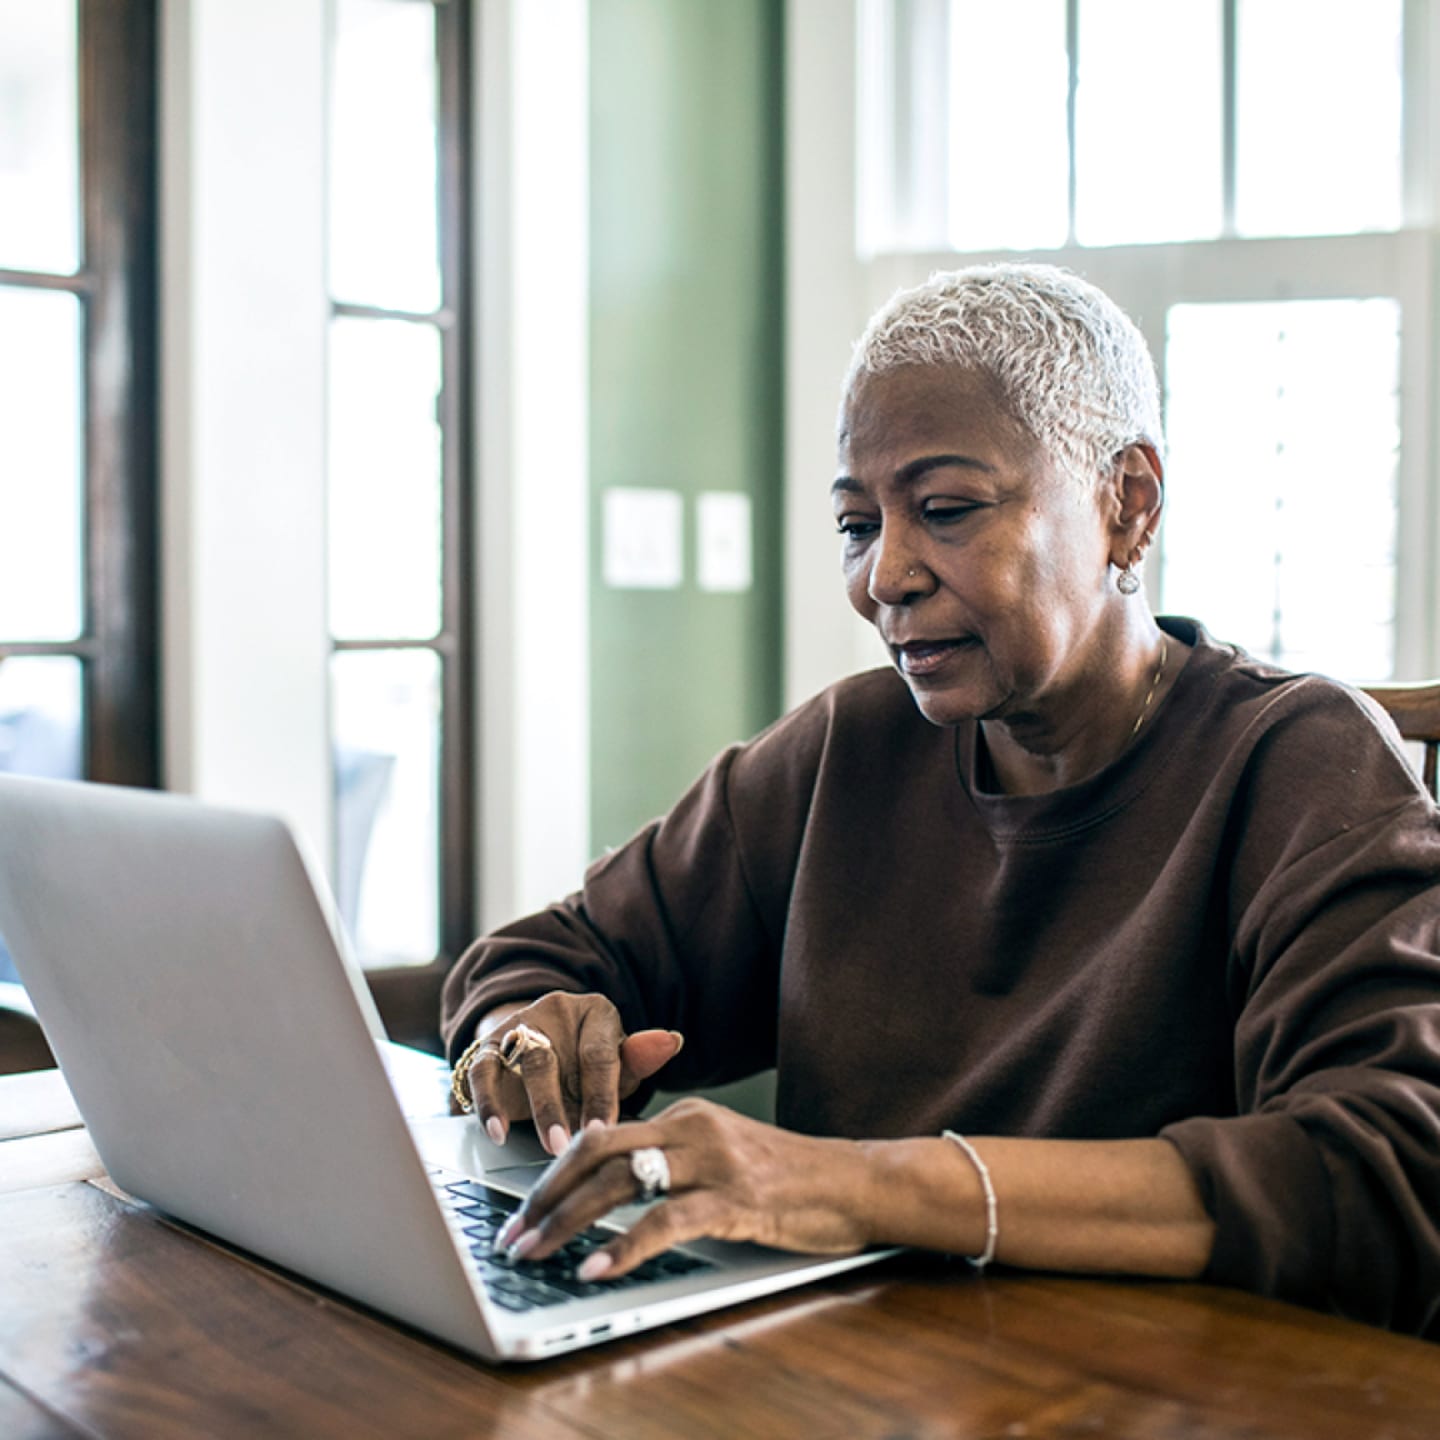 Retired woman working on laptop.